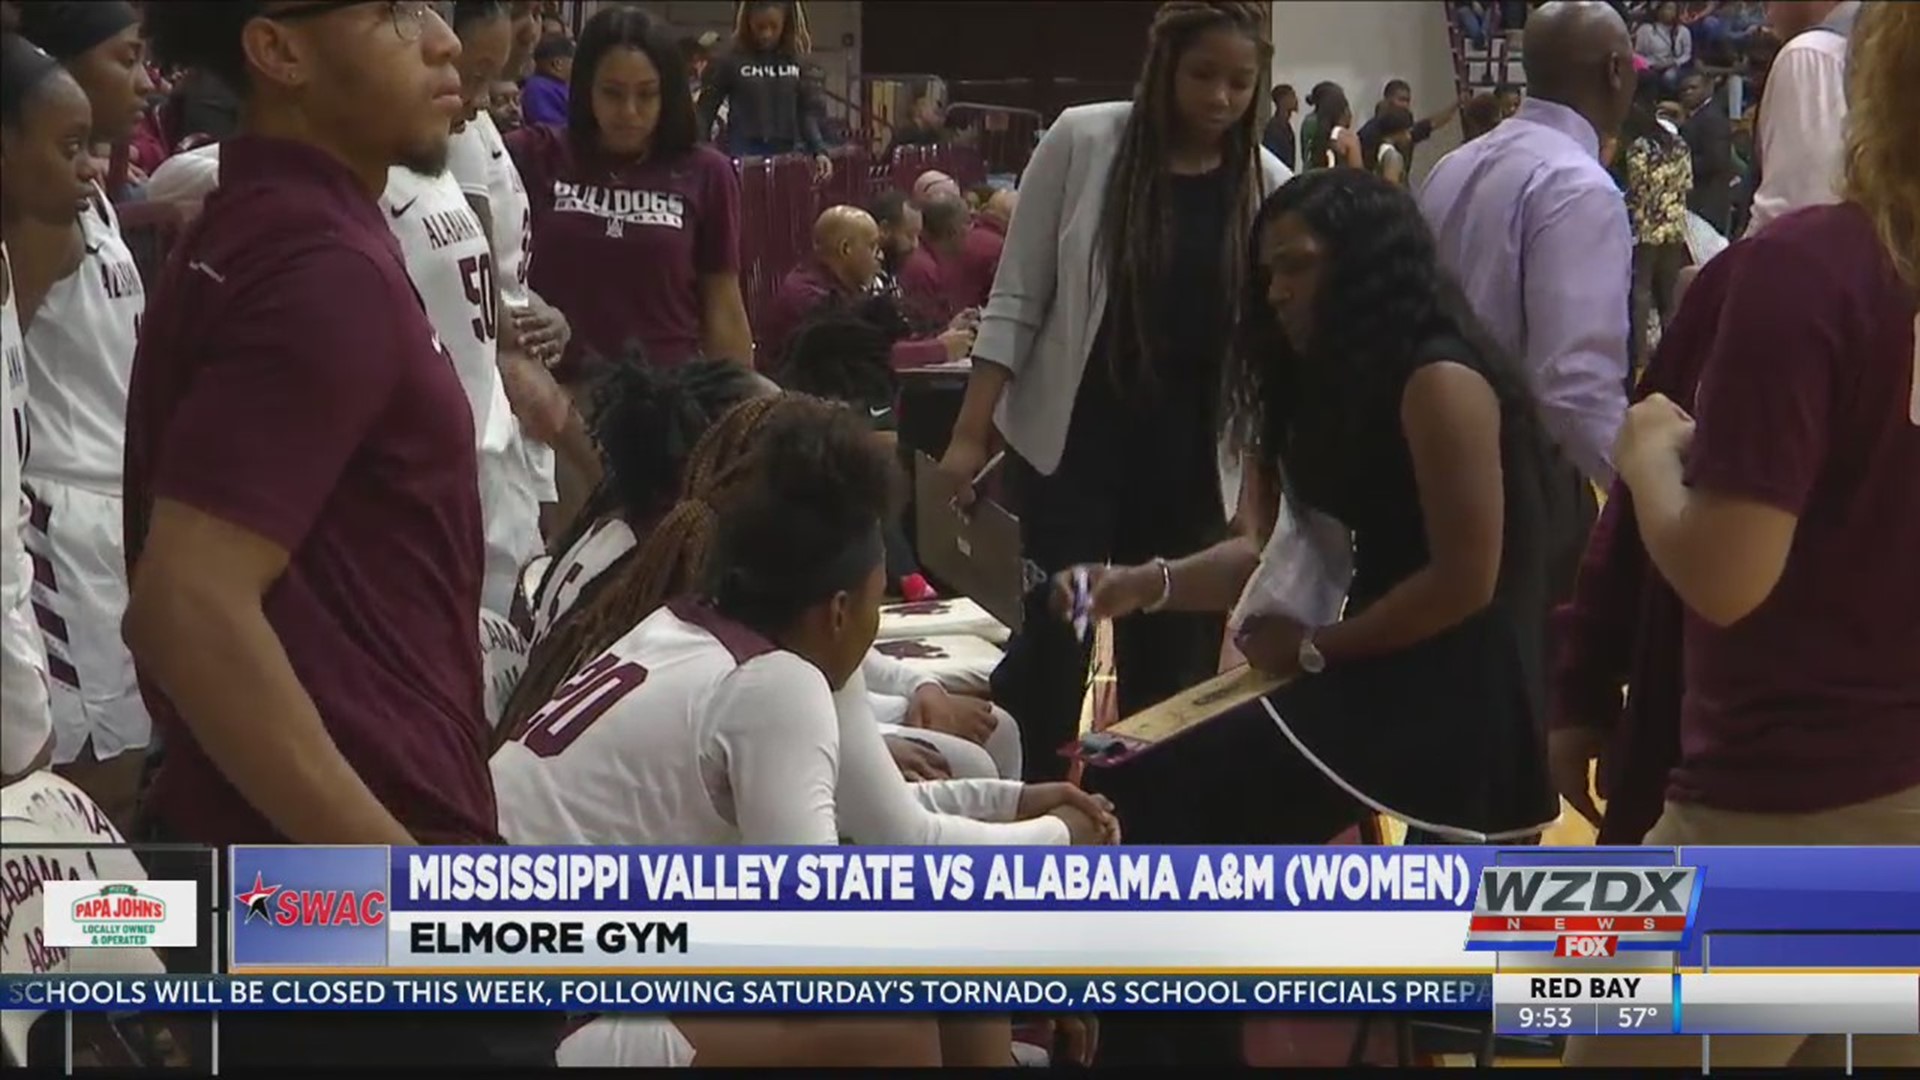 Alabama A&M defeated MVSU 68-48 tonight inside Elmore Gym.  The Lady Bulldogs dominated in the paint area against the Devilettes, led by junior DeShawna Harper who led all scorers wit 19 points, Dariauna Lewis who added 18 points and nine rebounds, along with Jameica Cobb recording a 12 point, 10 rebound double-double.